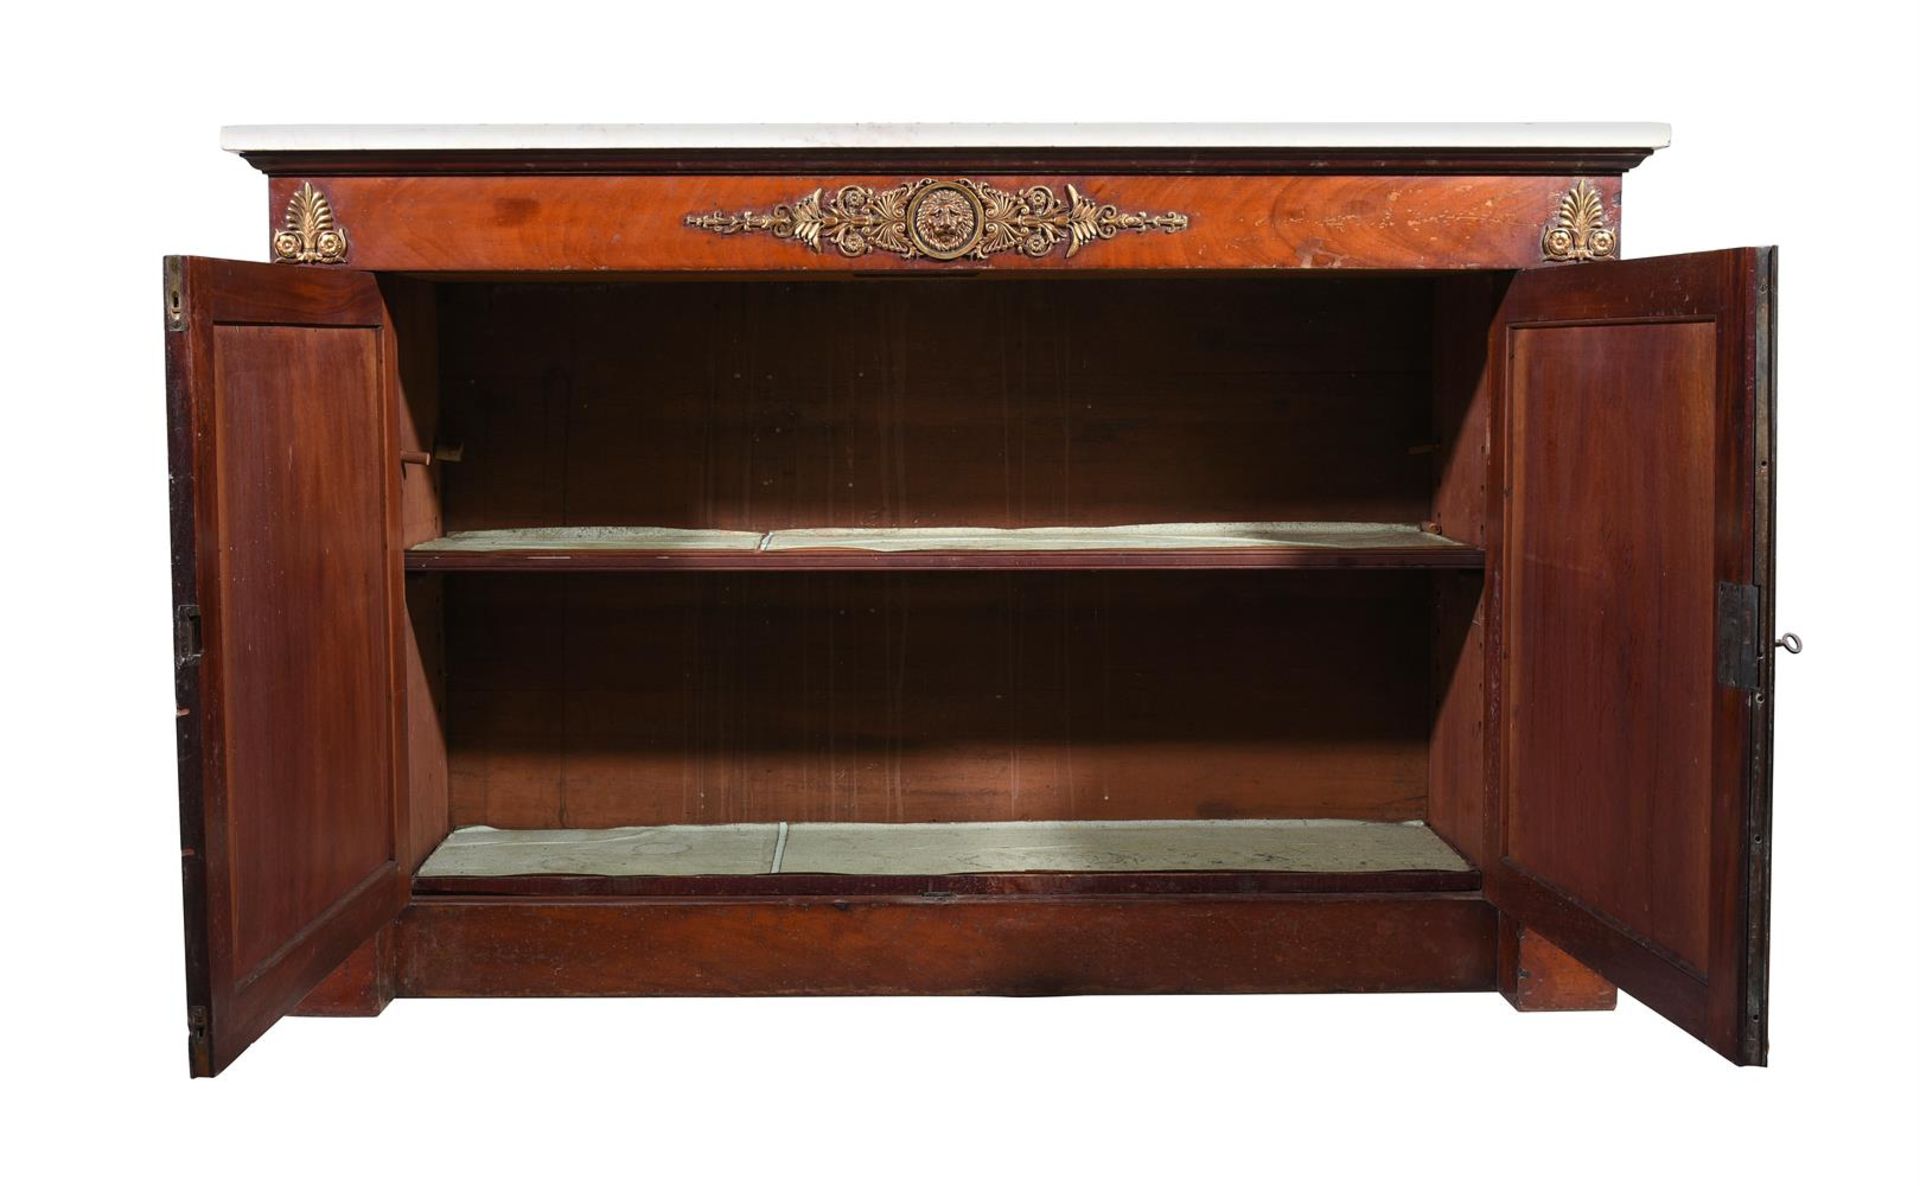 AN EMPIRE MAHOGANY AND ORMOLU MOUNTED SIDE CABINET, STAMPED 'JACOB D. RUE MESLEÉ' - Bild 5 aus 5